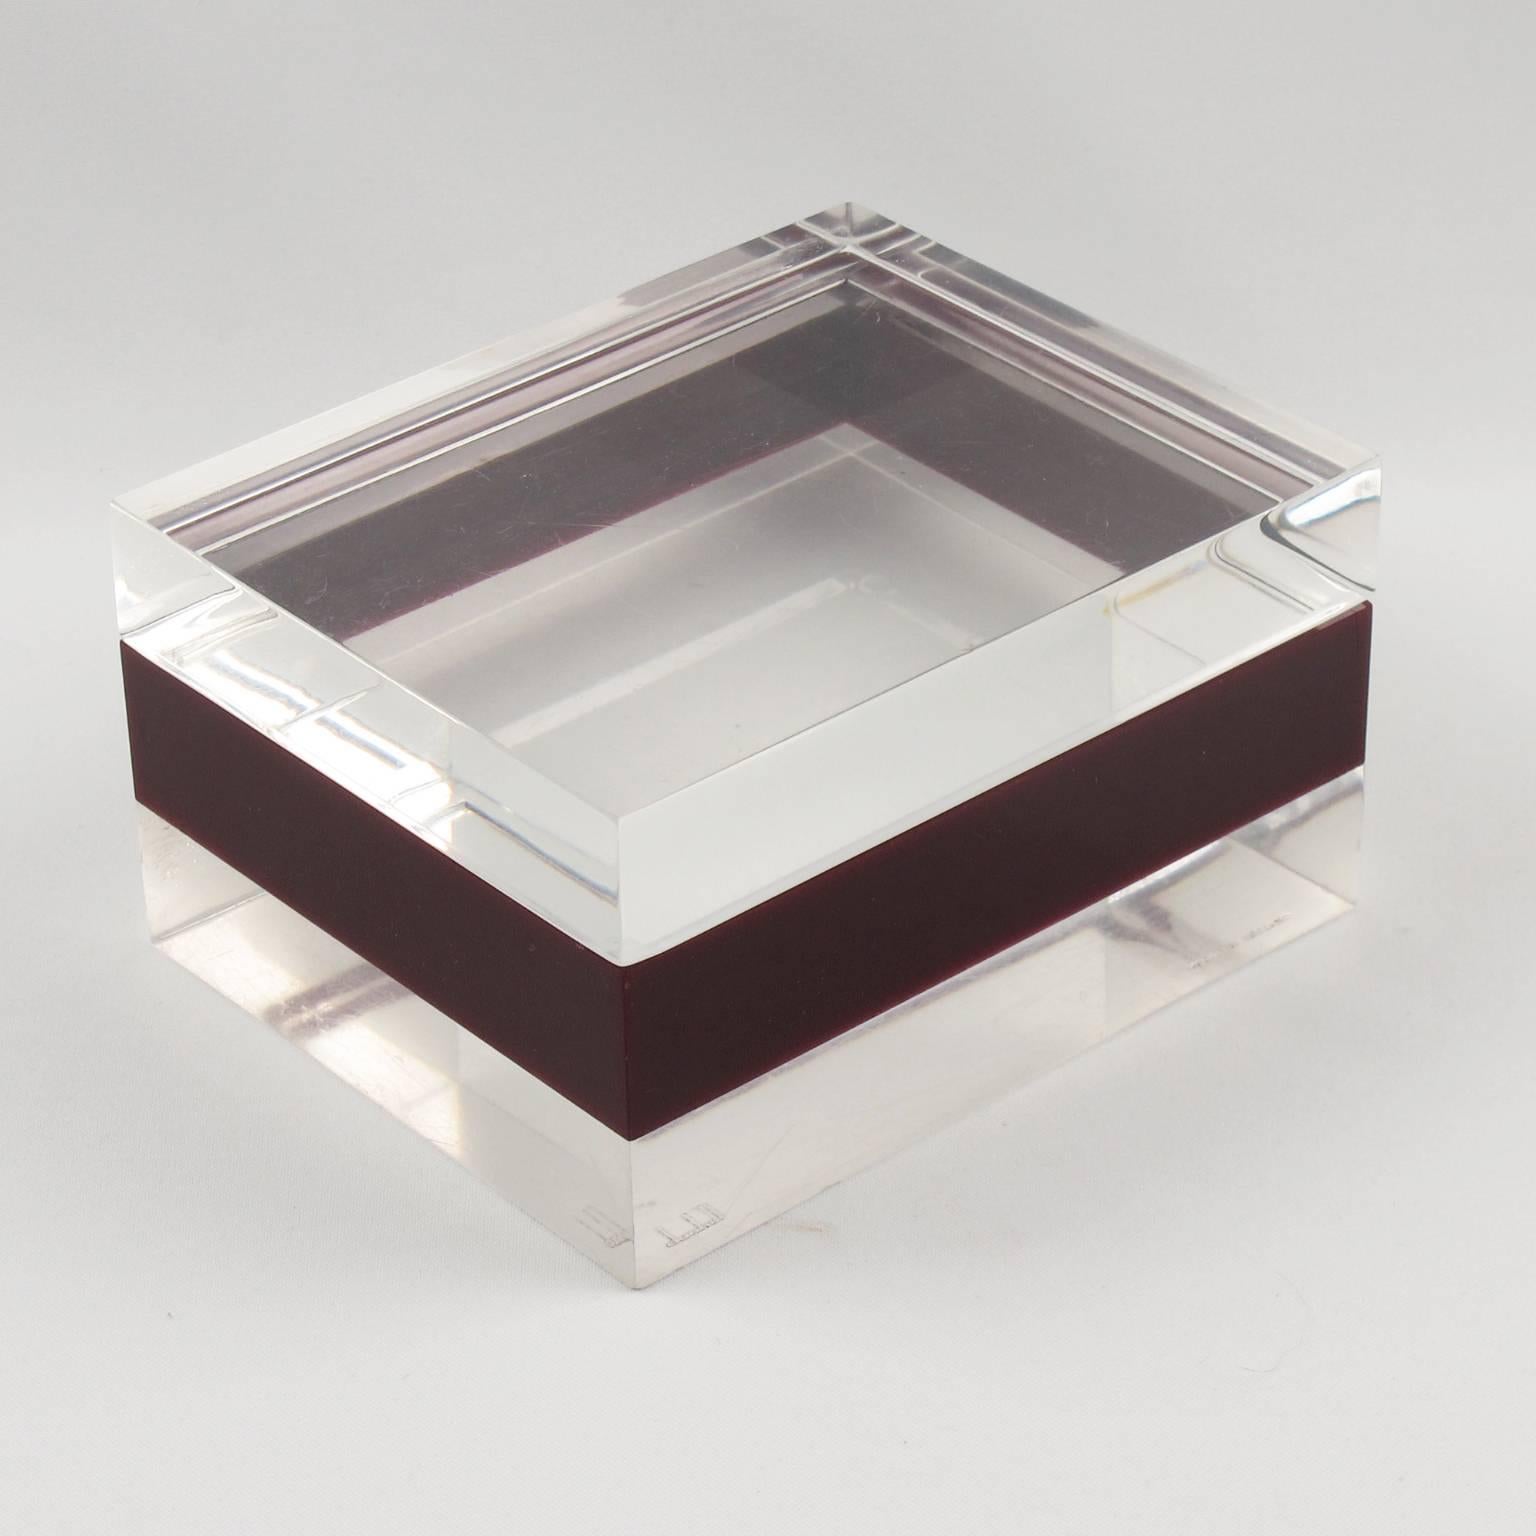 Rare Mid-Century modernist Lucite decorative box by Dunhill, England, circa 1970s. Crystal clear and cranberry red color, geometric rectangular shape, gorgeous design. Marked underside: Dunhill - Made in England. 

Measurements: 4.5 in. wide (11 cm)